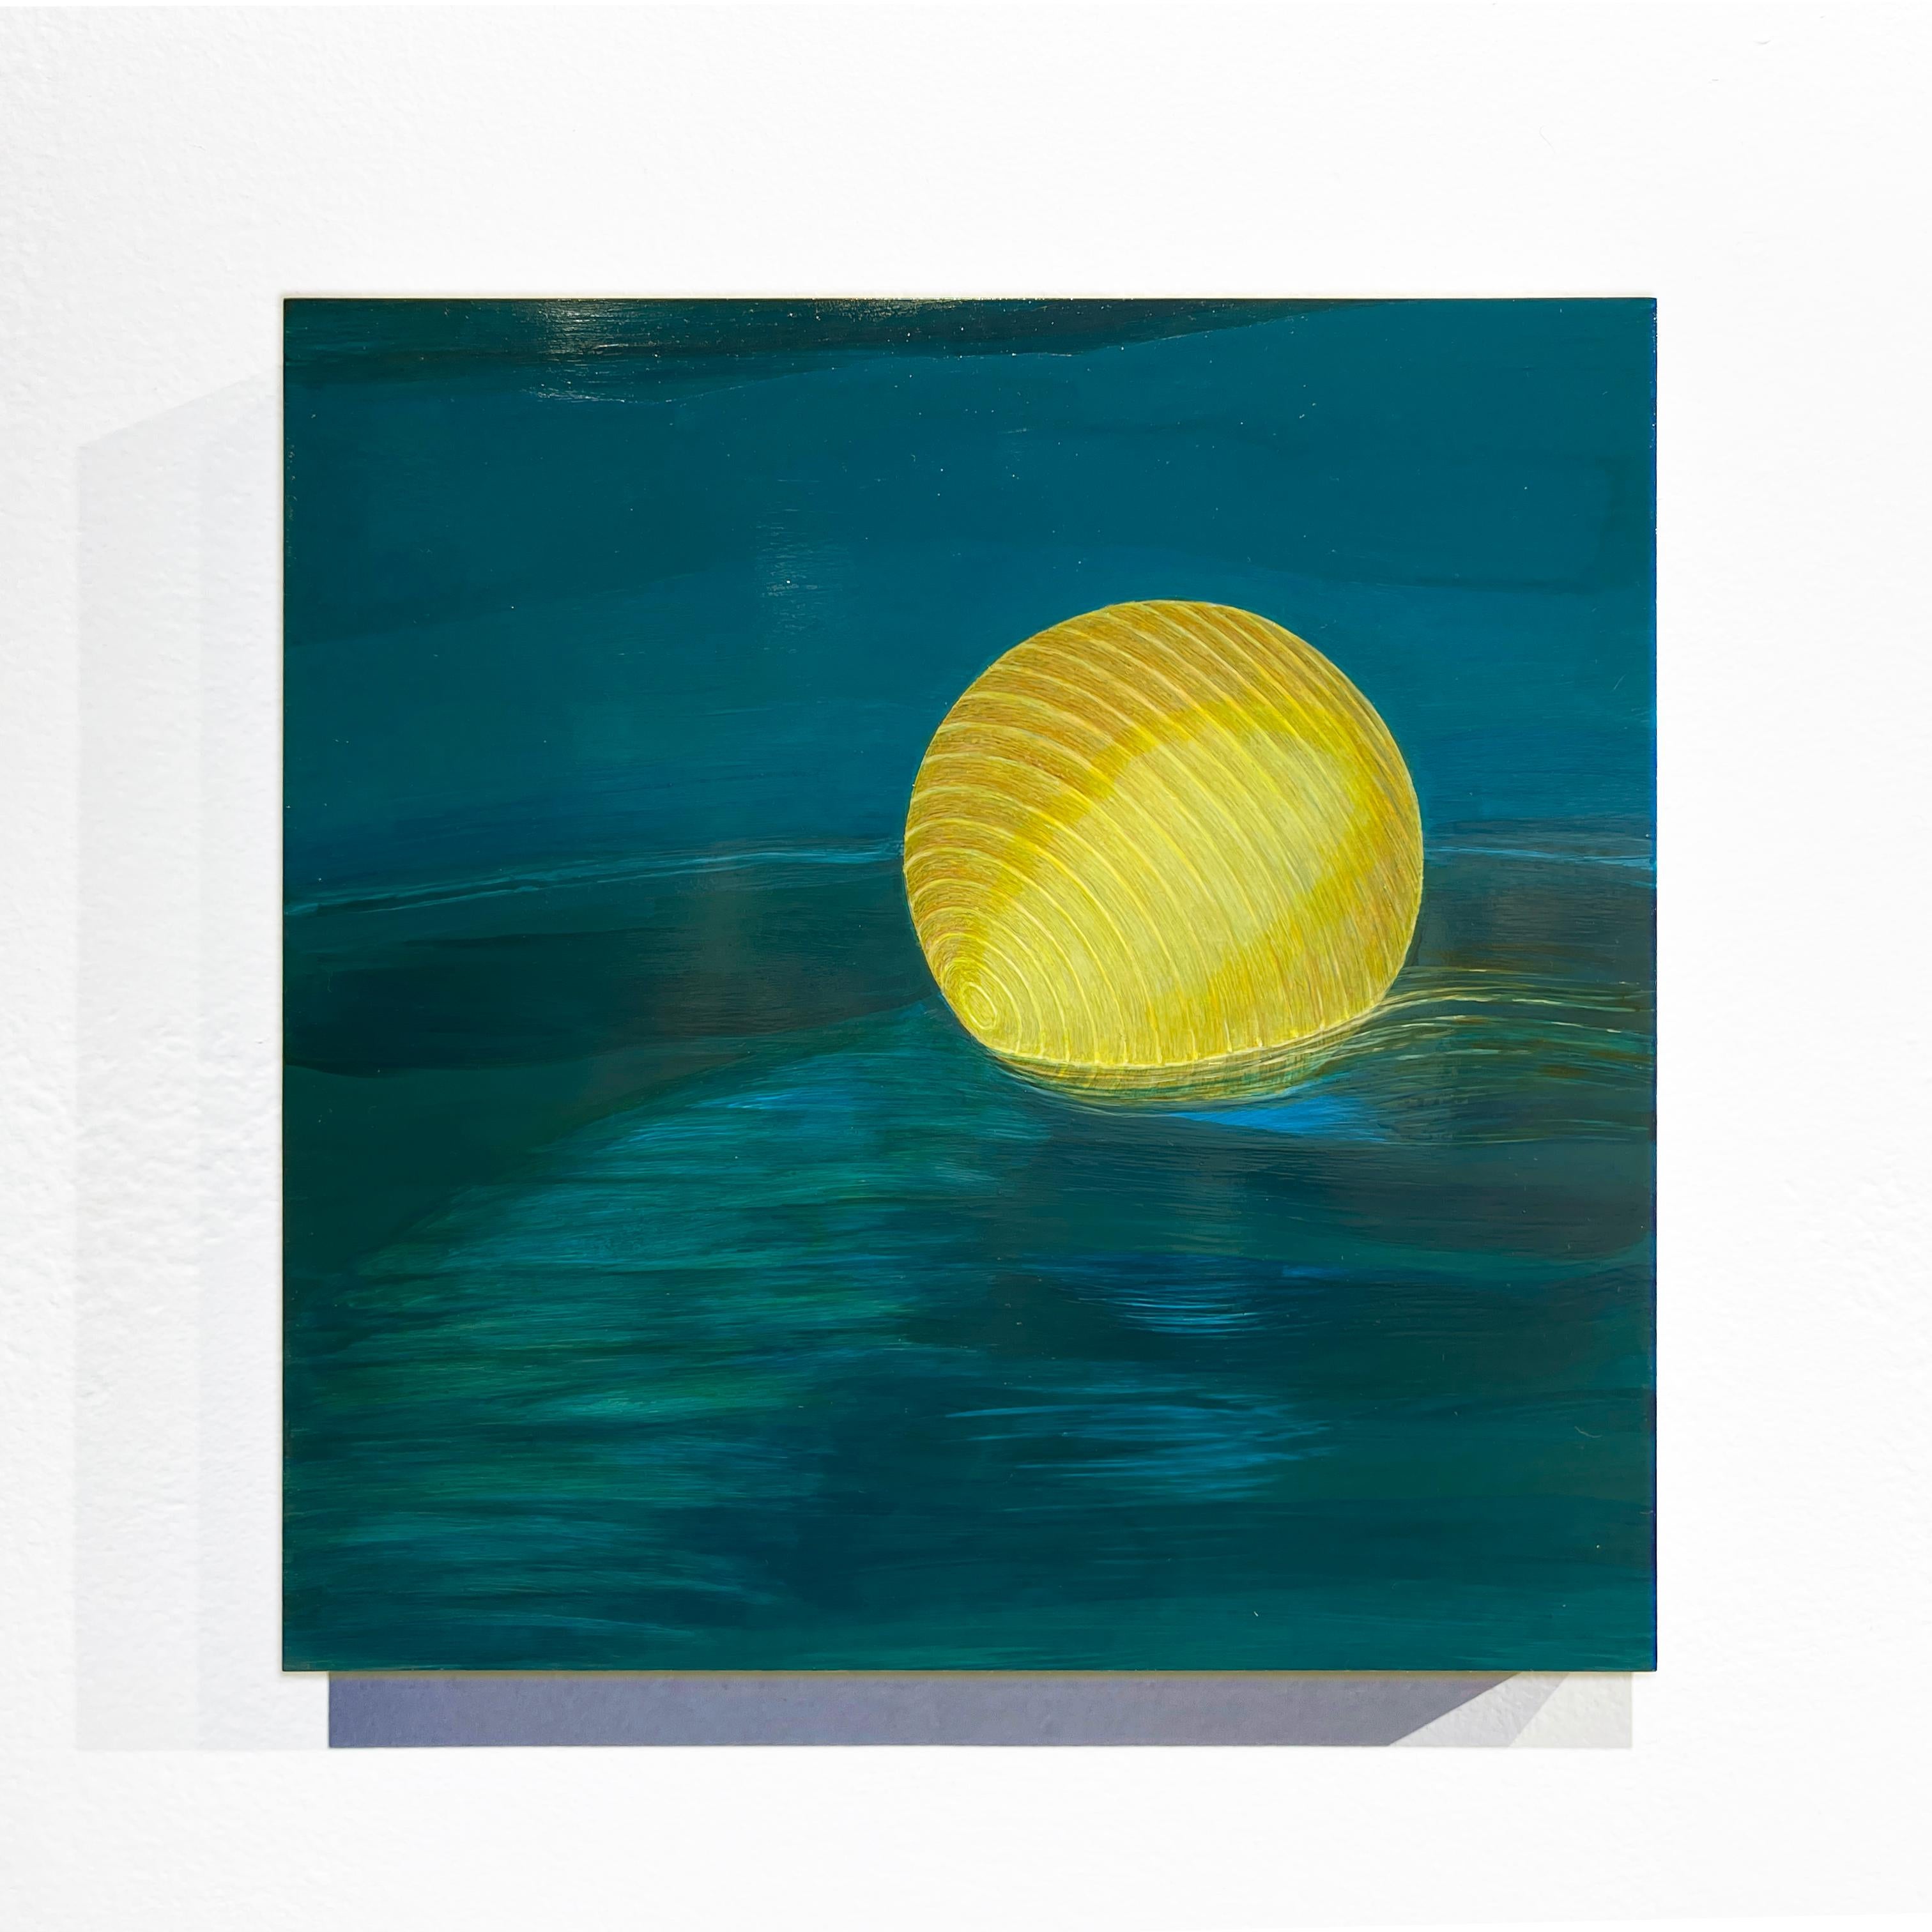 Ocean Rest - Illuminated Paper Lantern on Vivid Blue Water, Acrylic on Panel - Painting by Christina Haglid